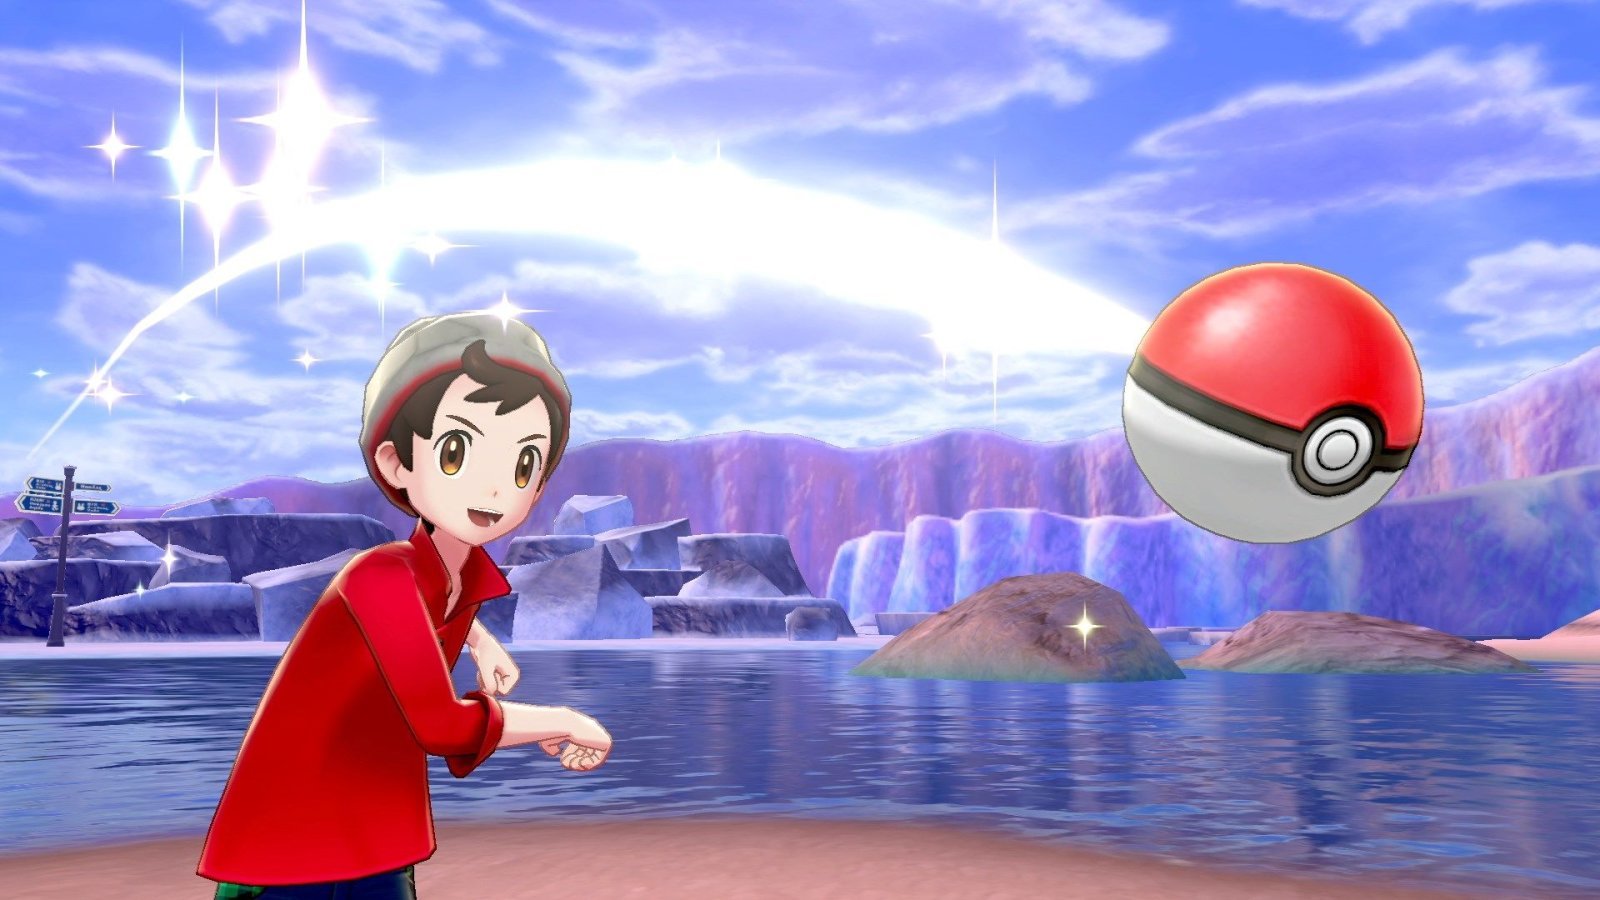 can you use amiibos in pokemon sword and shield